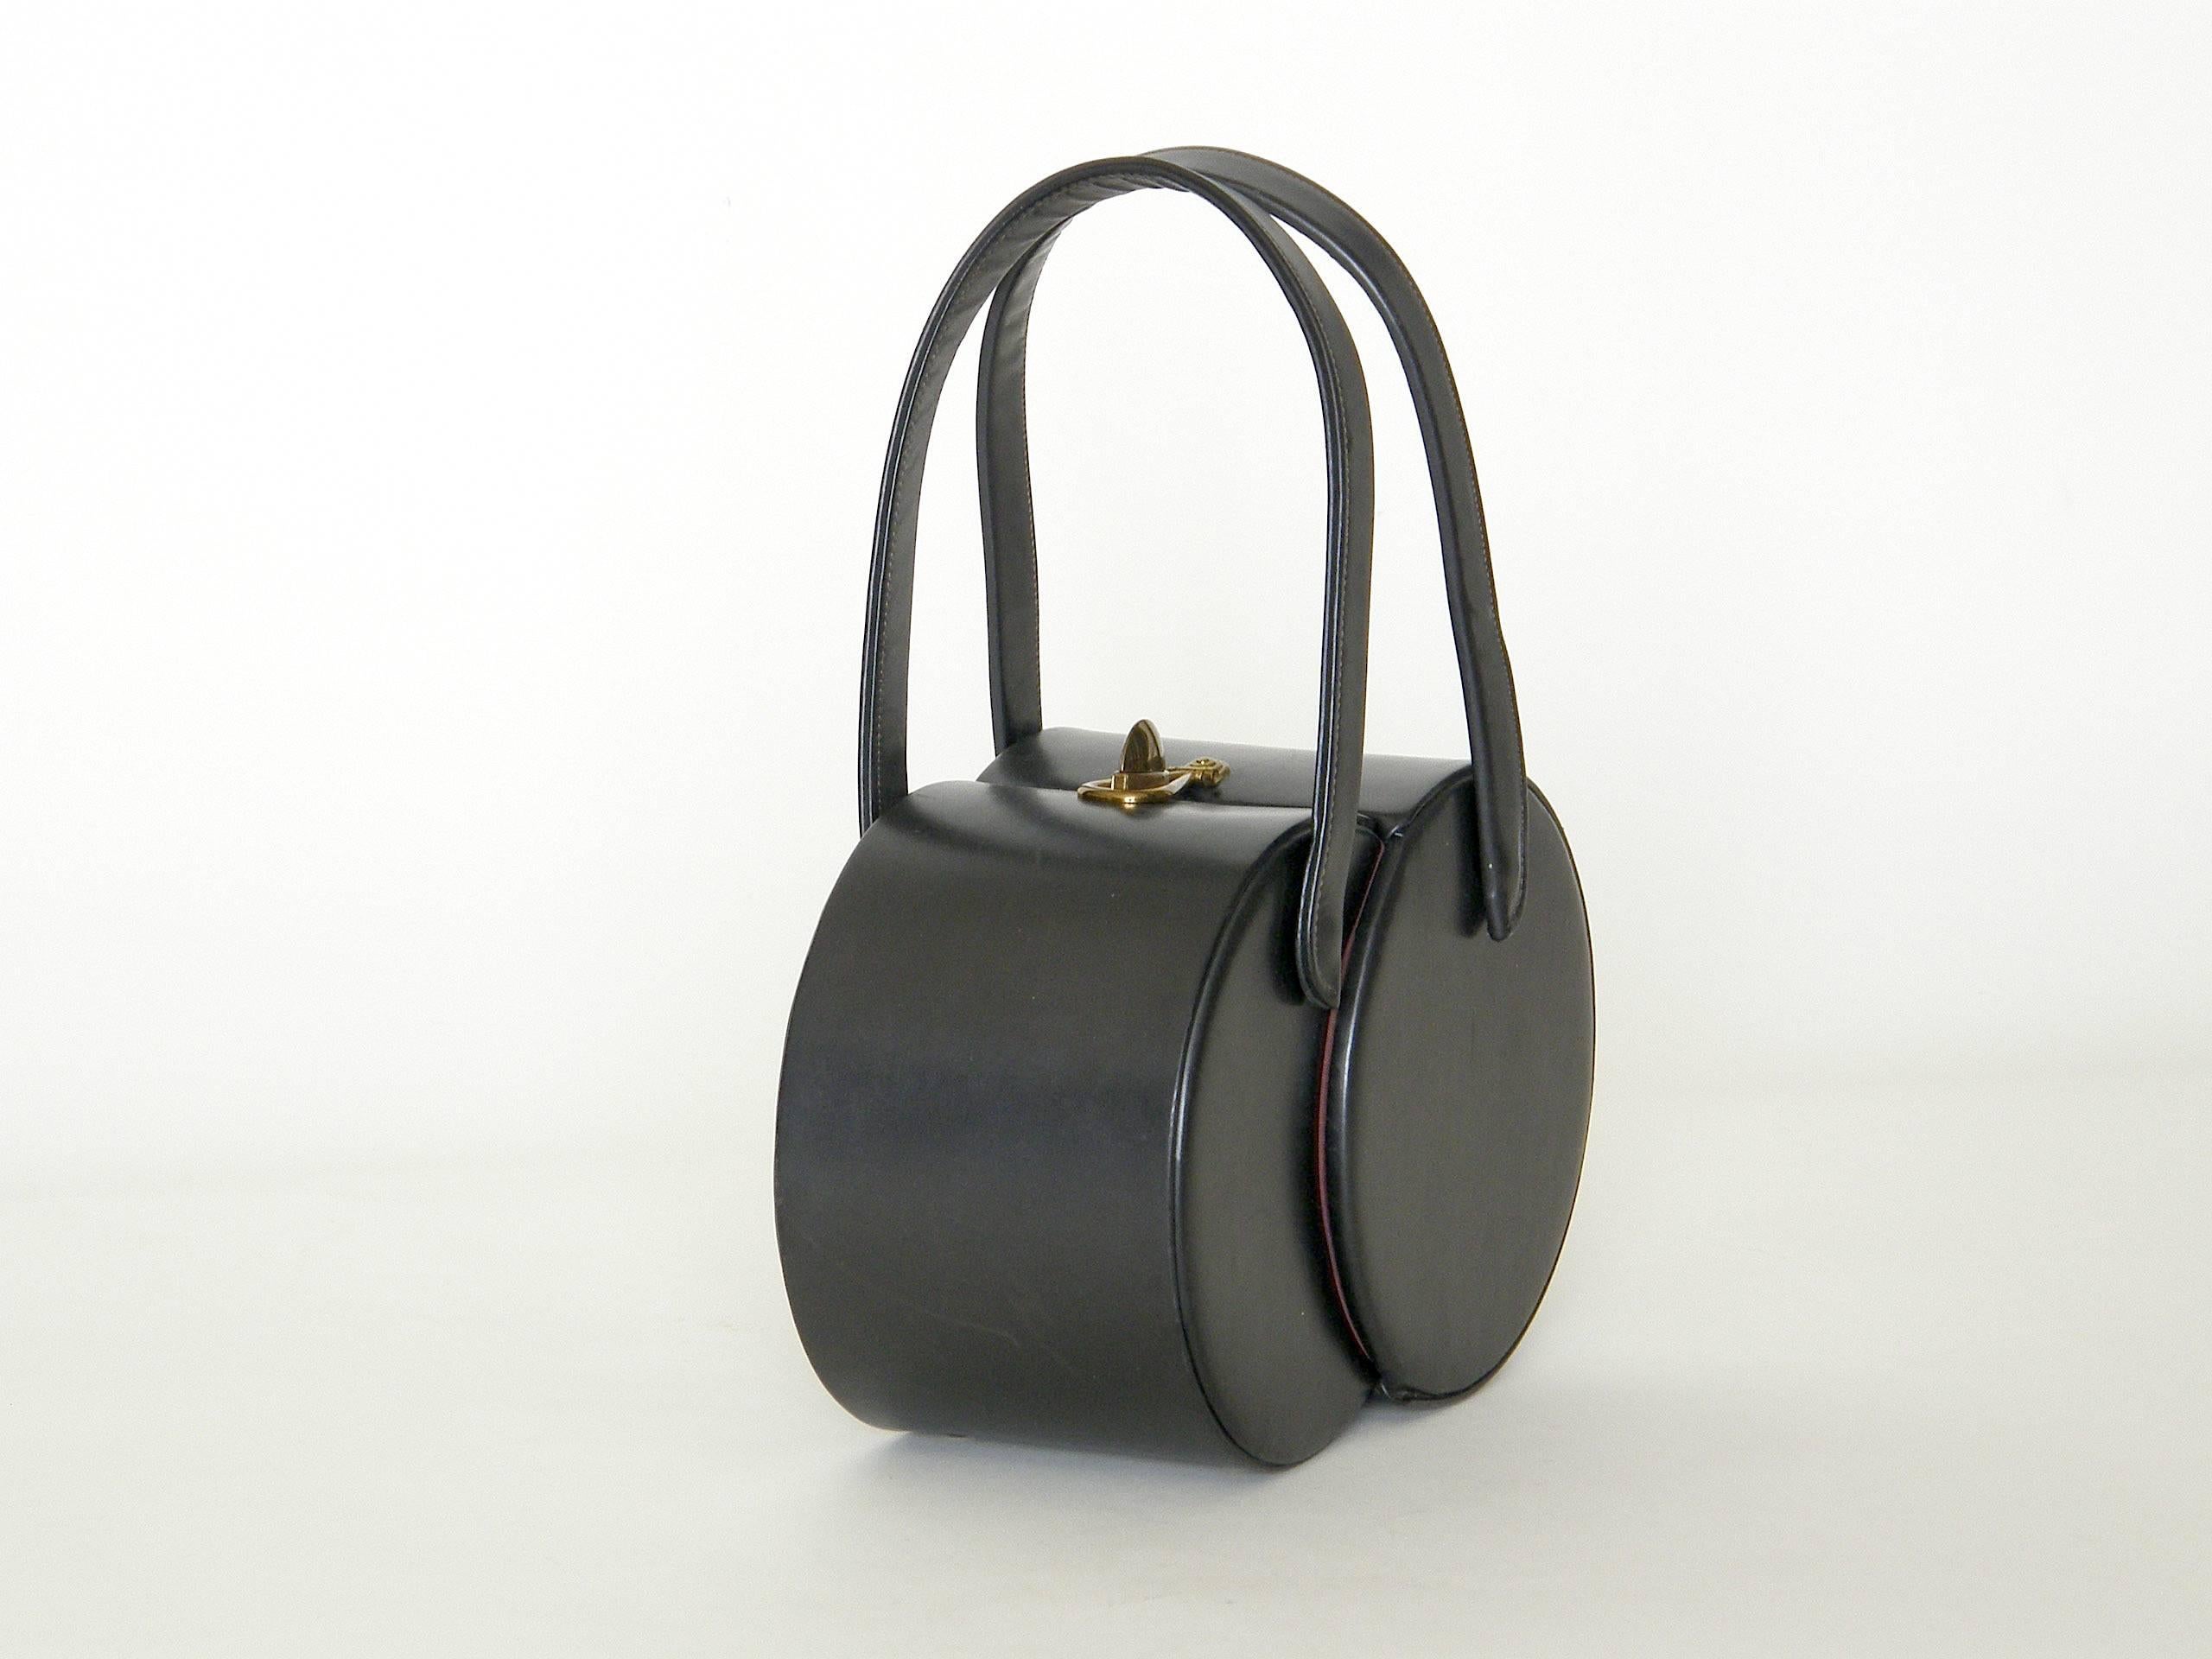 This sculptural, graphite leather handbag is a fun twist on the box bag. It's made of two cylinders that overlap and pivot out to open. It has two top handles, a turn lock clasp and four little cap feet. The height is 5.5